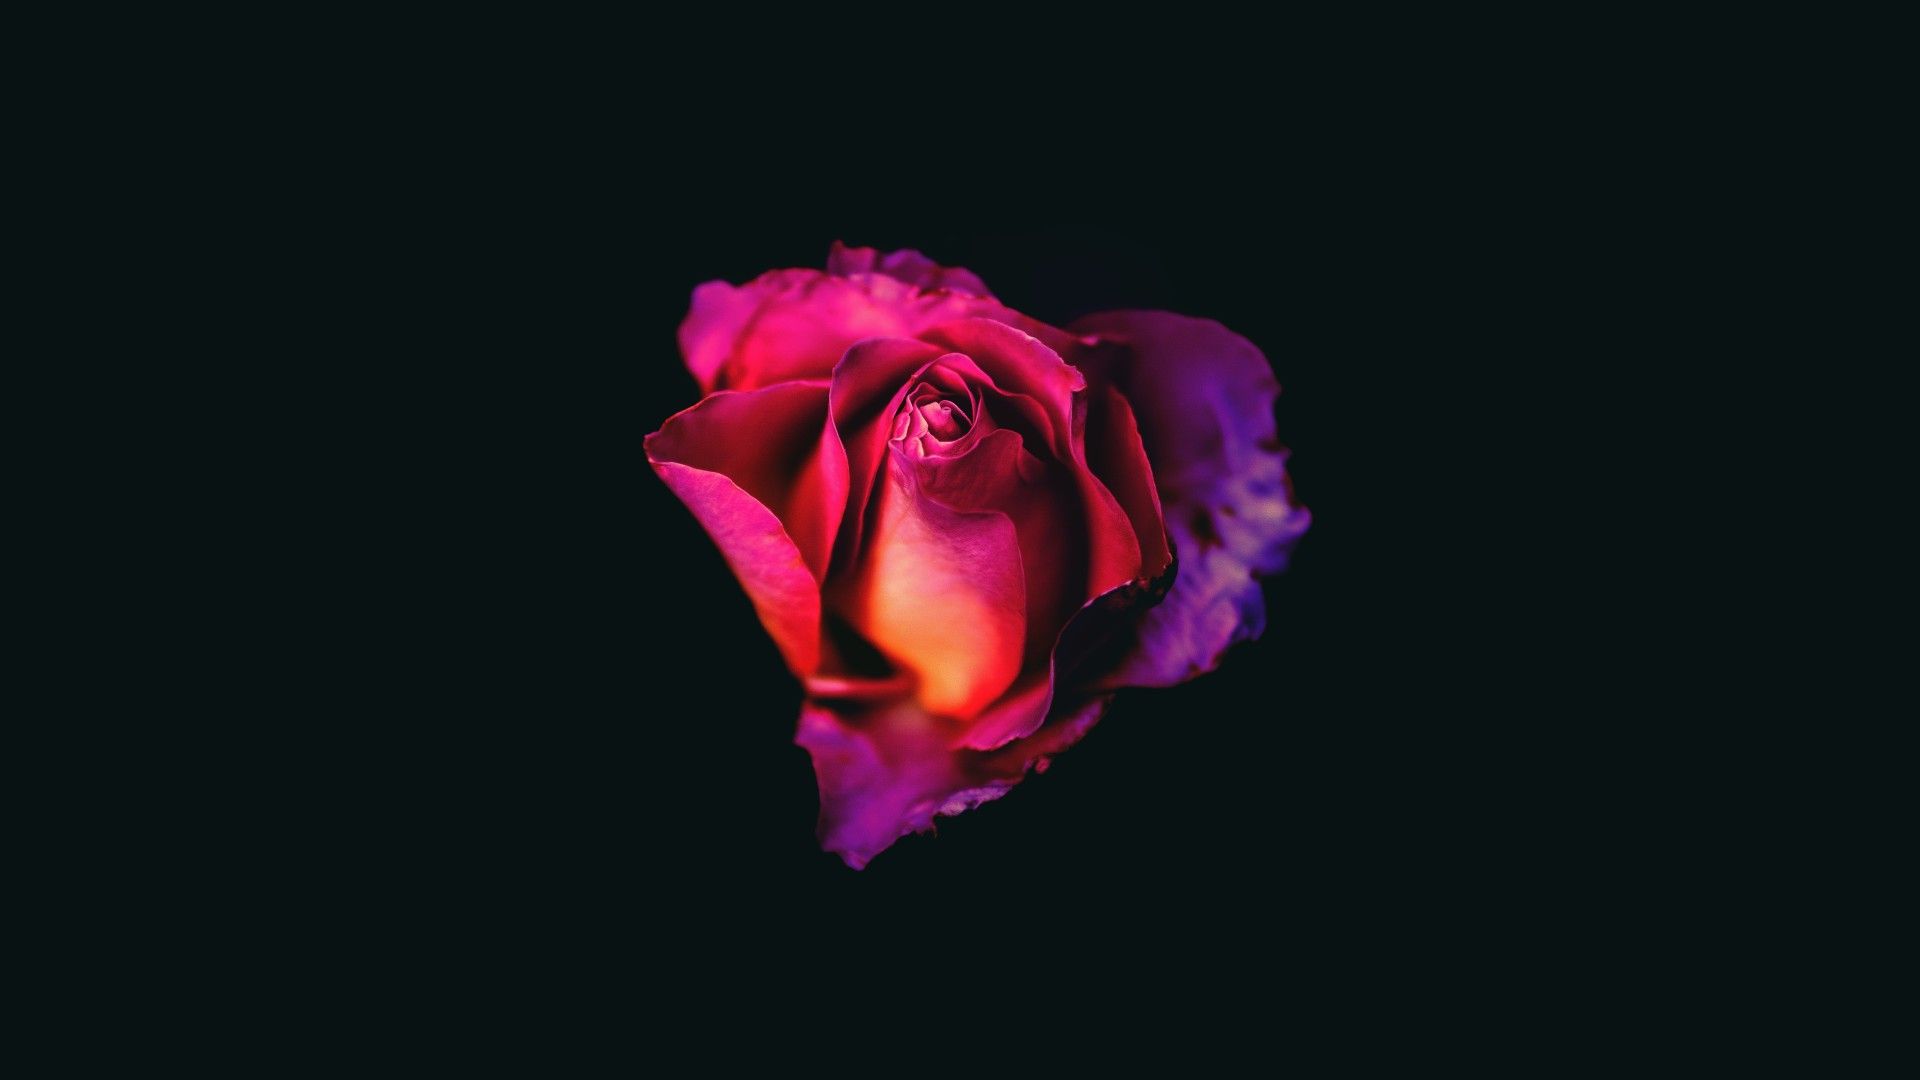 Rose Oled Dark 8k Laptop Full HD 1080P HD 4k Wallpaper, Image, Background, Photo and Picture